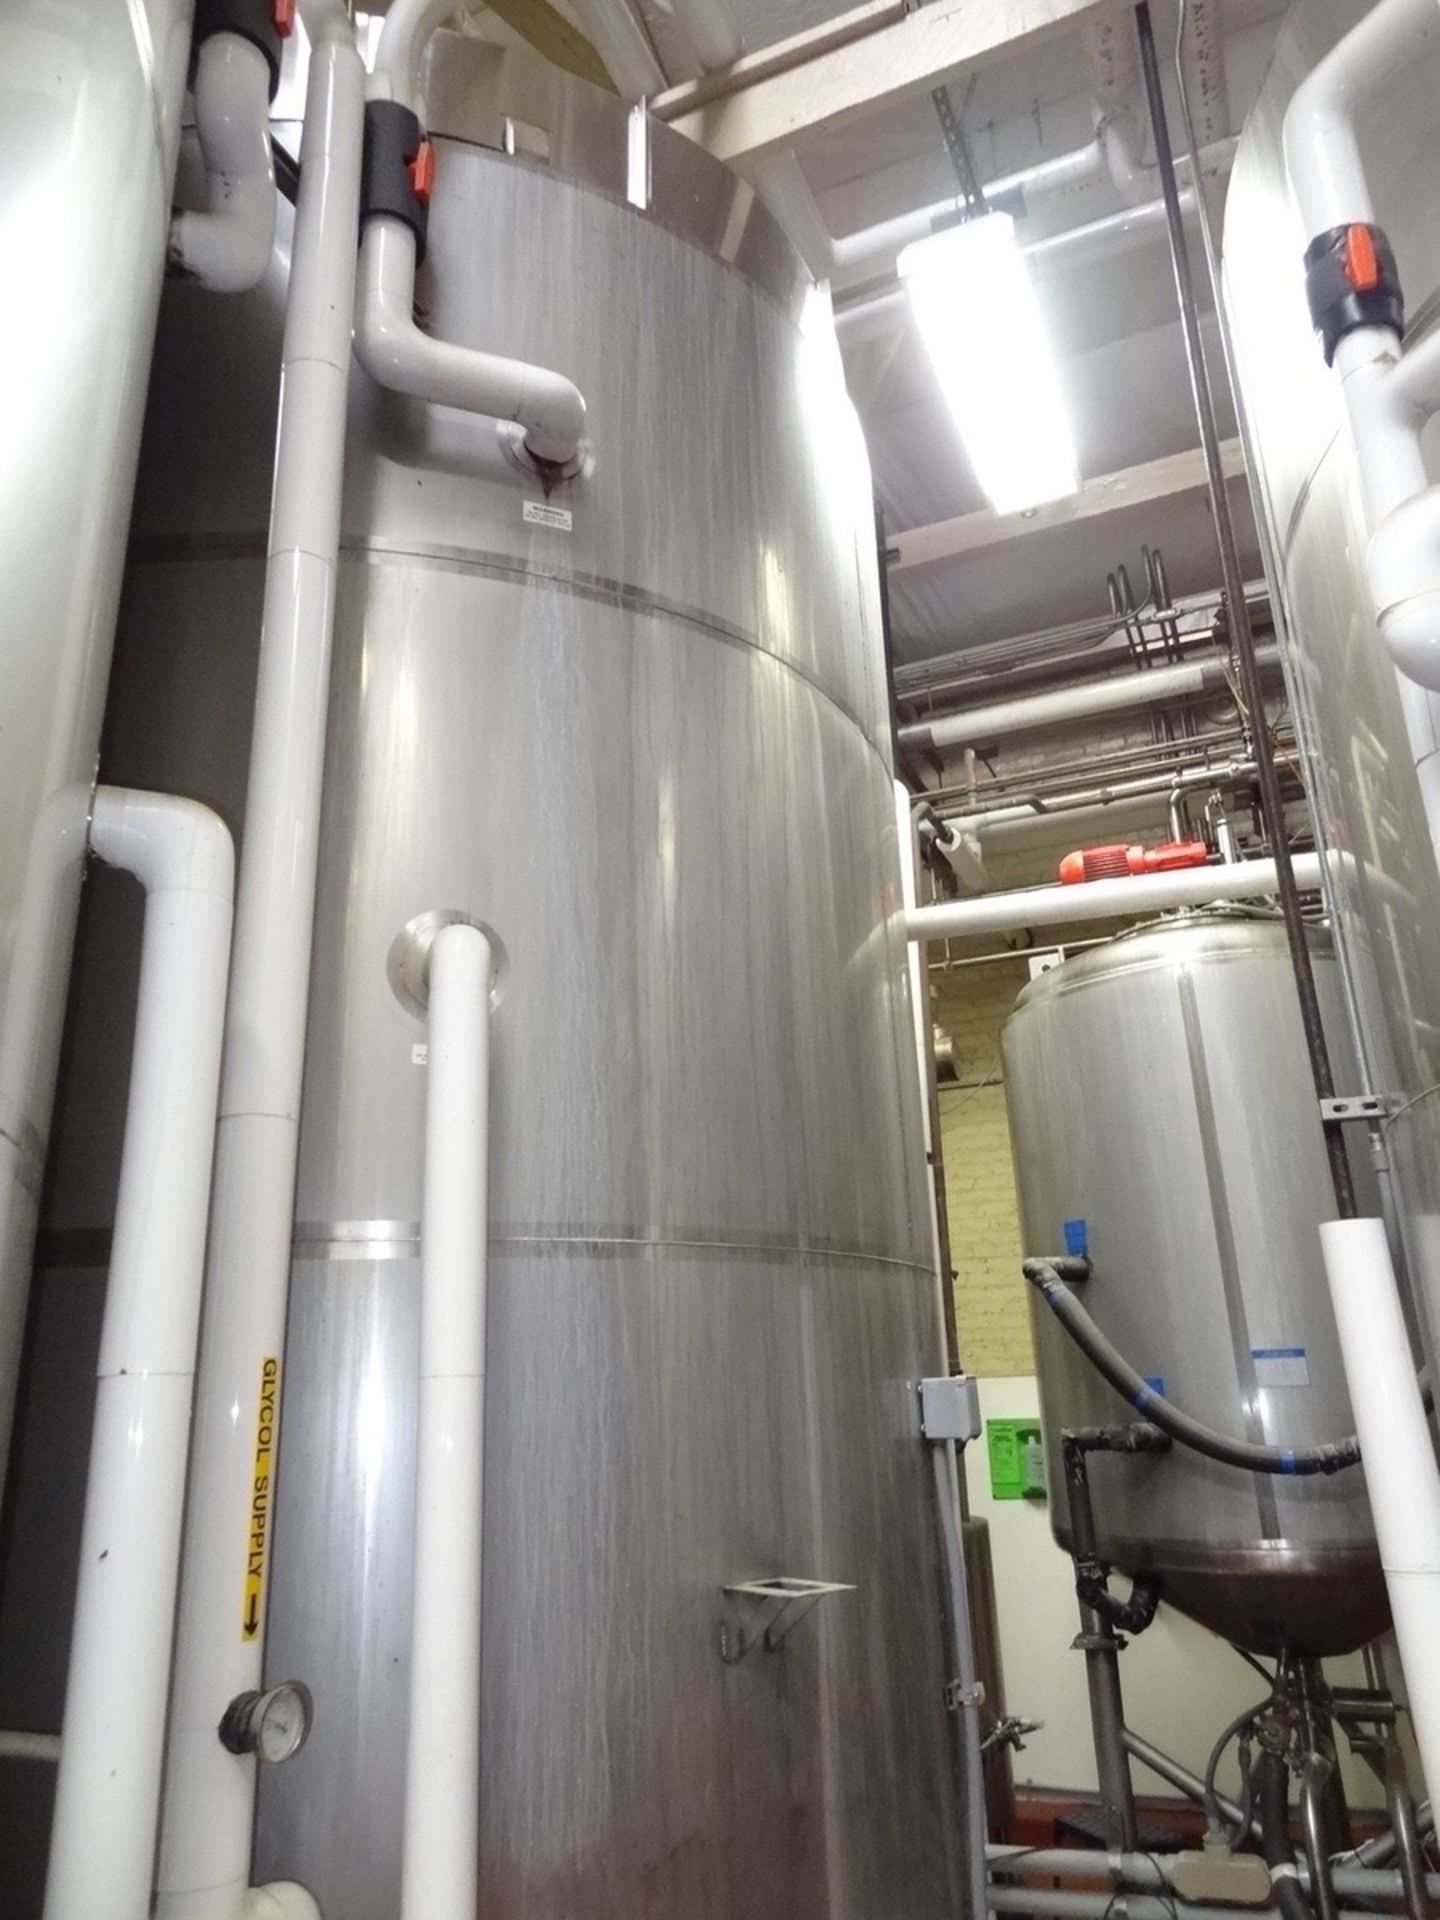 2002 JV Northwest 164 Barrel/5,000 Gallon Stainless Steel Jacketed Fermenter, Top A | Rig Fee: $2250 - Image 9 of 10